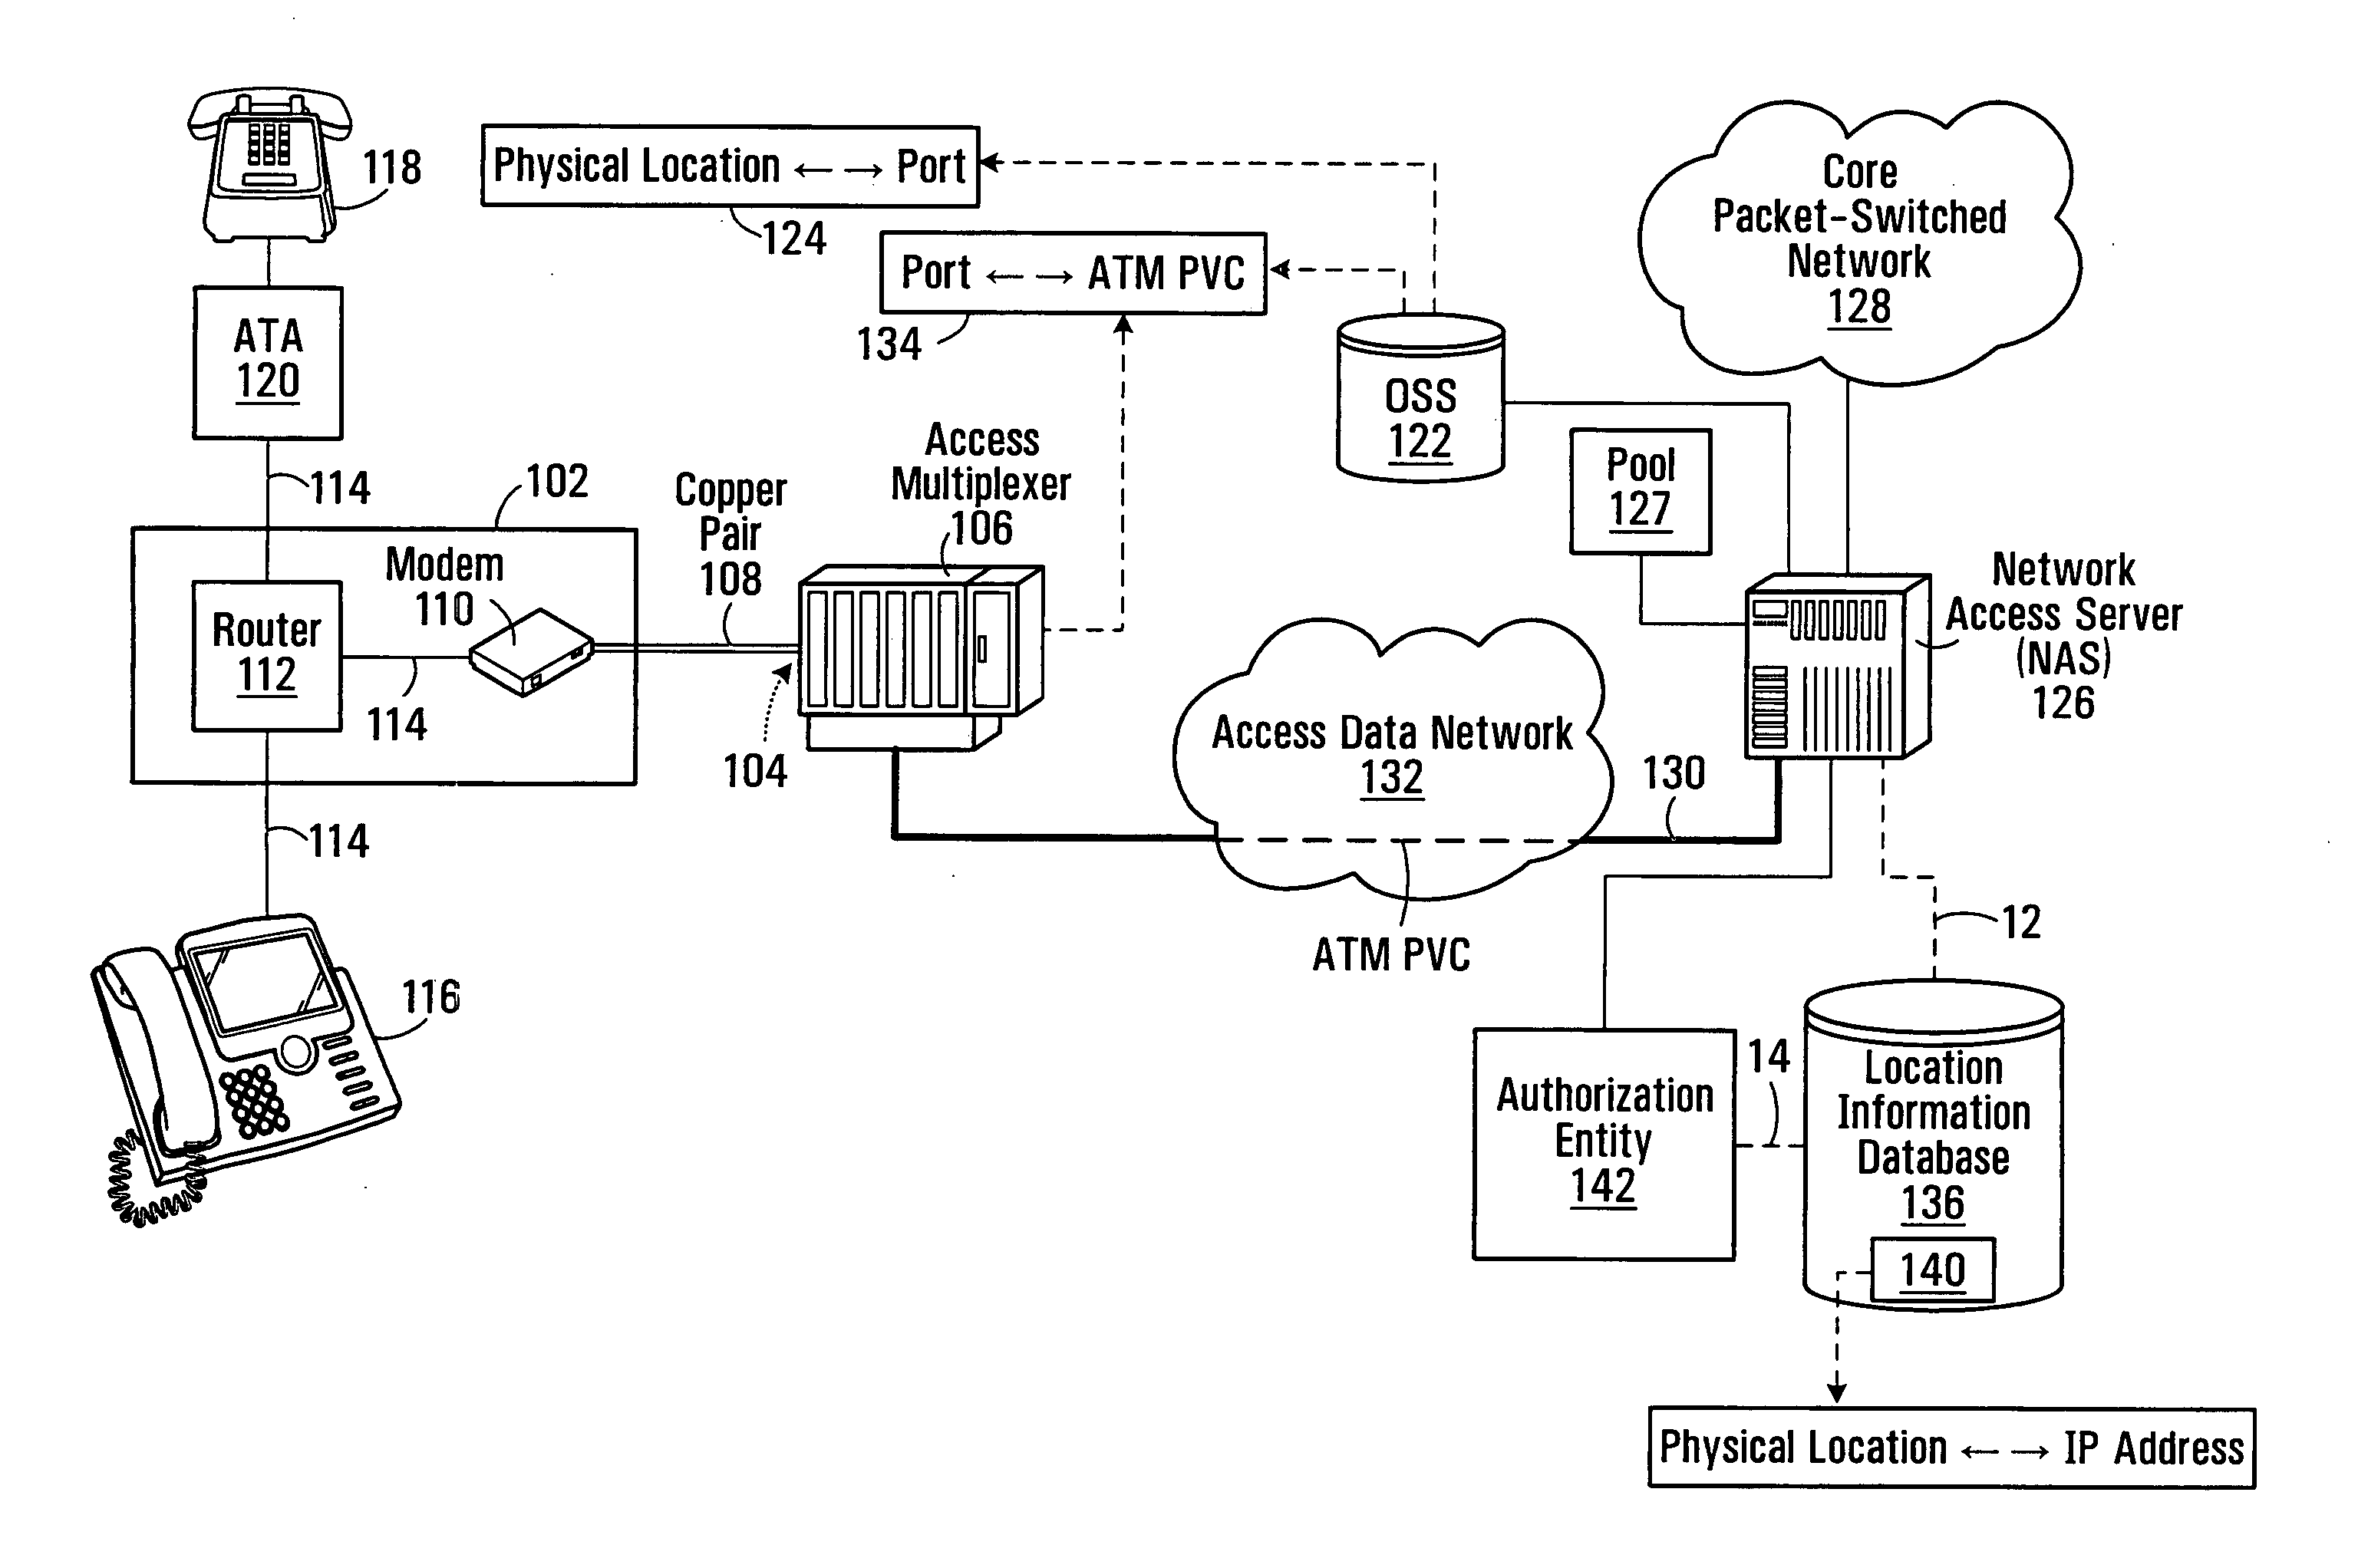 Method for populating a location information database used in the delivery of emergency and other location-based services in a VoIP environment